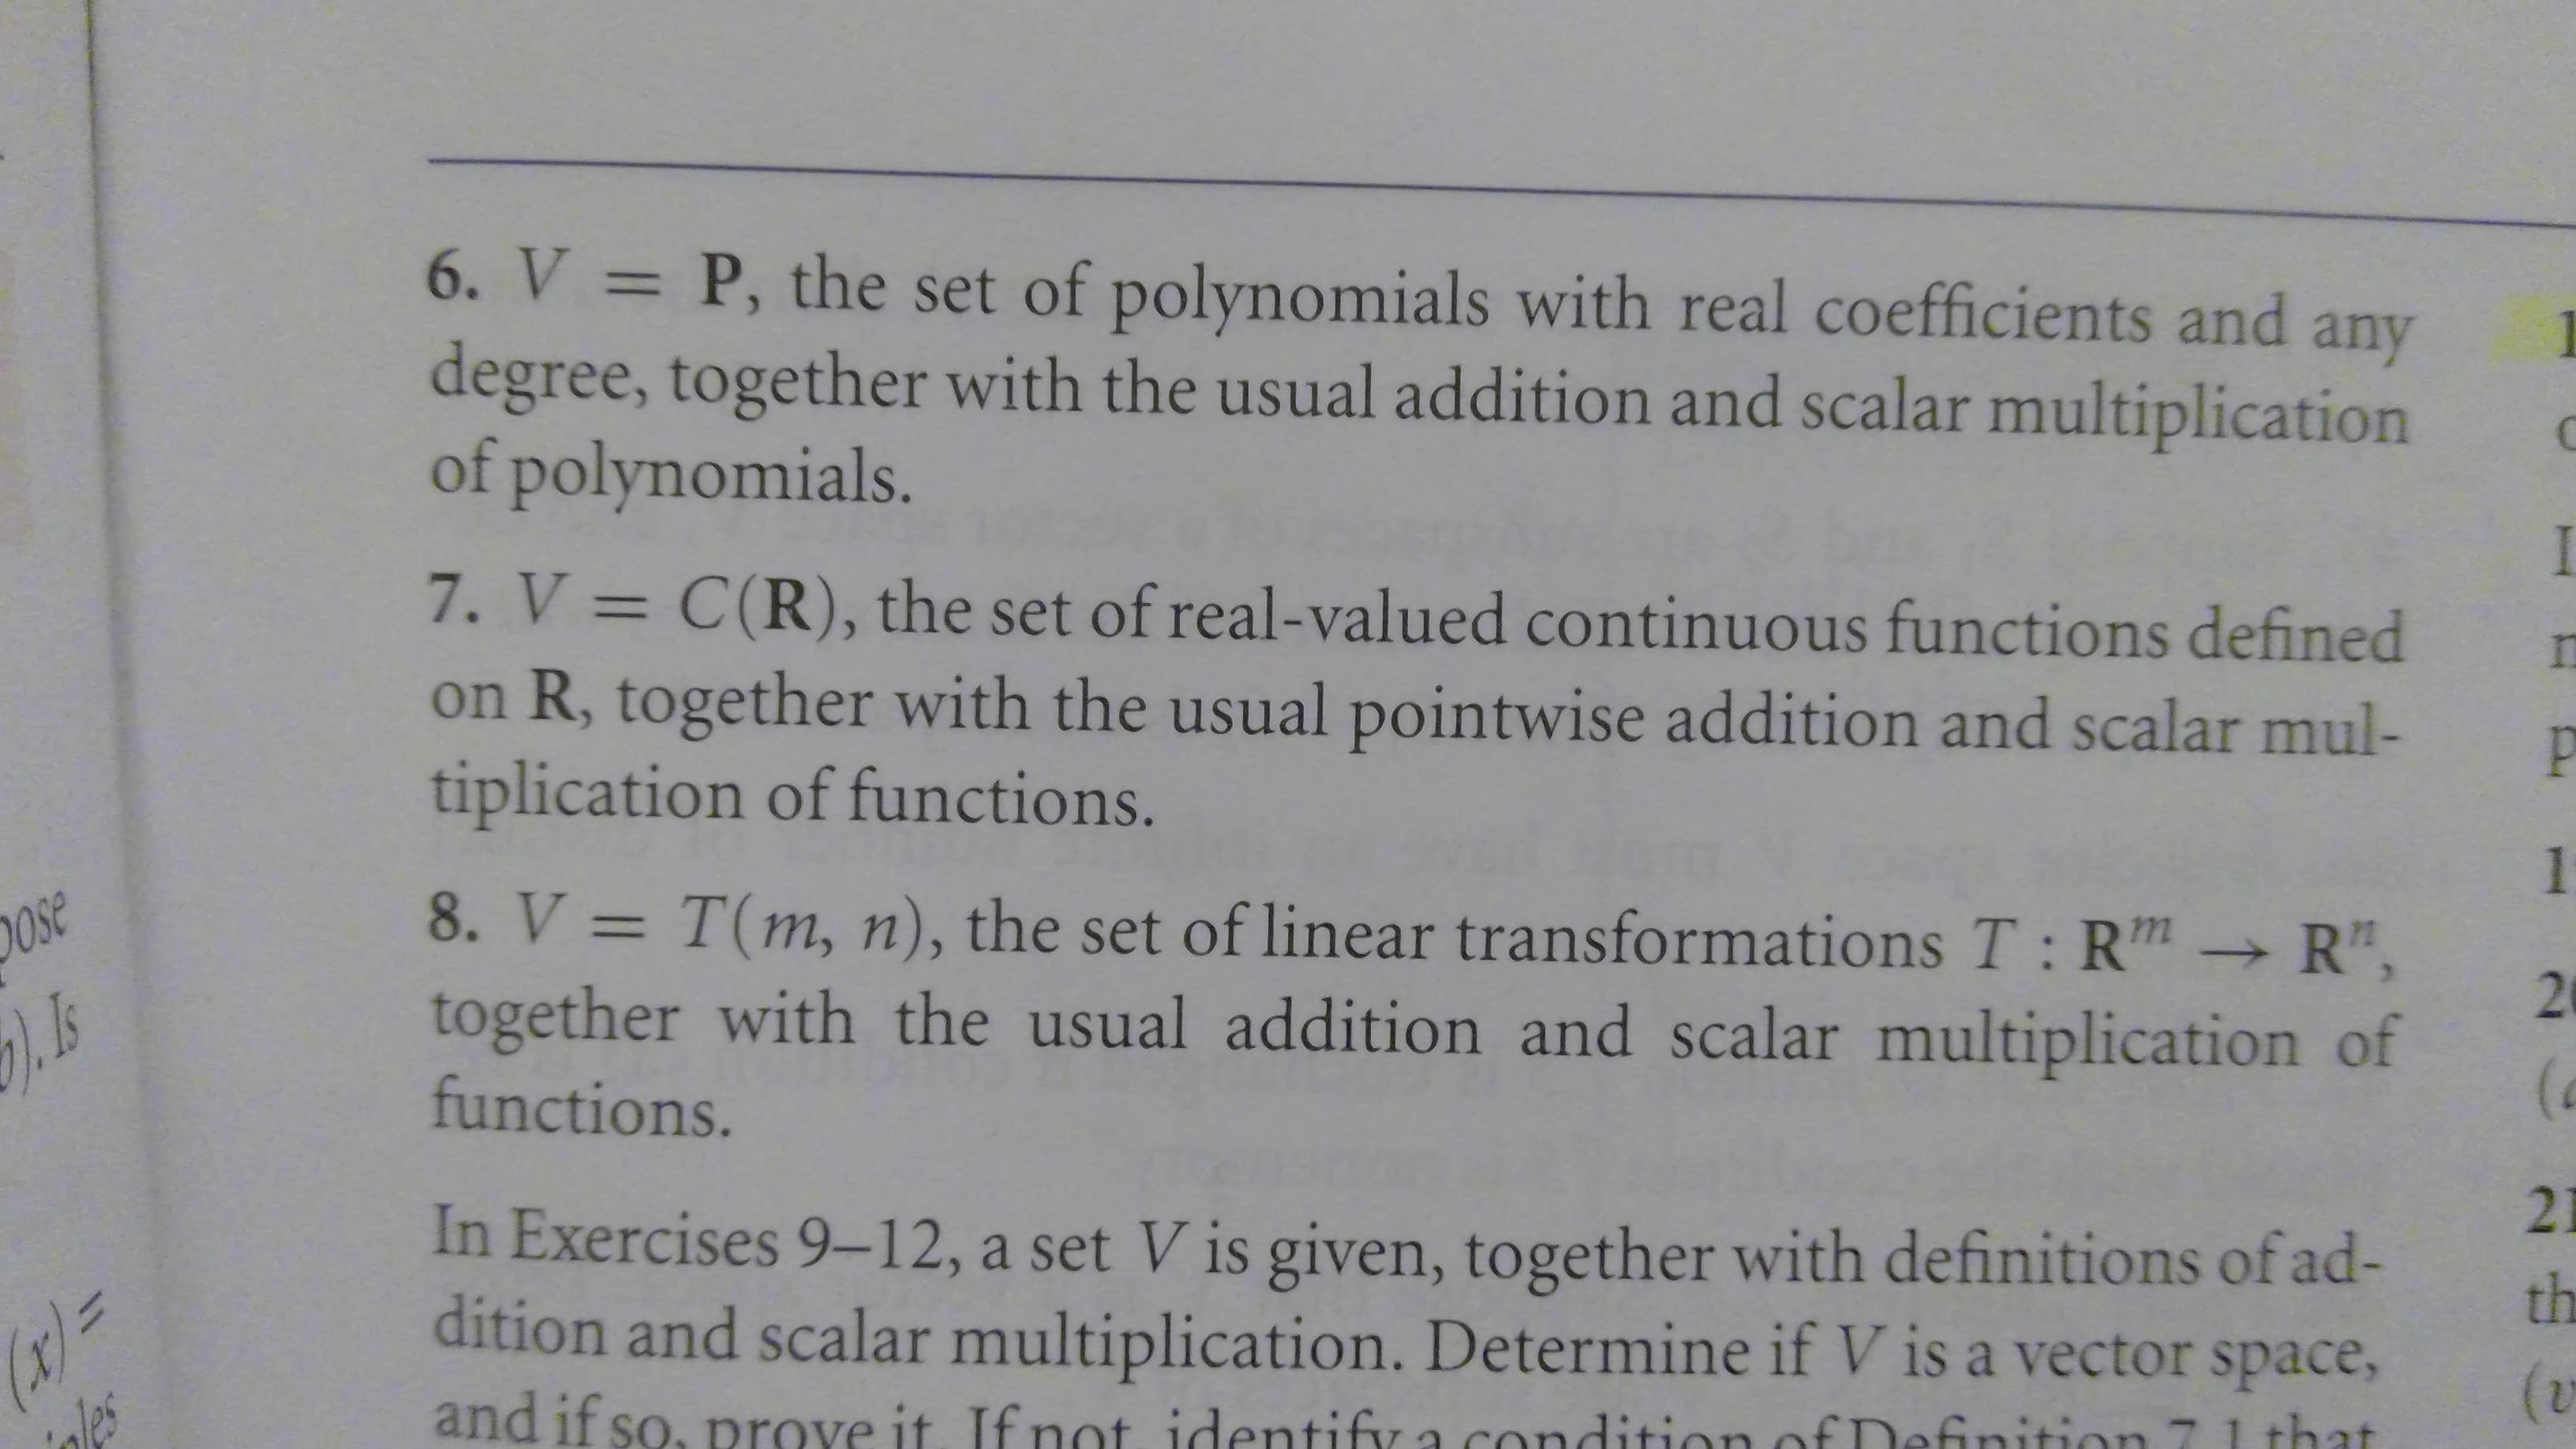 6. V P, the set of polynomials with real coefficients and
degree, together with the usual addition and scalar multiplication
of polynomials.
11
any
7. V = C(R), the set of real-valued continuous functions defined
on R, together with the usual pointwise addition and scalar mul-
tiplication of functions.
P
8. V T(m, n), the set of linear transformations T: Rm R",
together with the usual addition and scalar multiplication of
functions.
Ose
1
In Exercises 9-12, a set V is given, together with definitions of ad-
dition and scalar multiplication. Determine if V is a vector space,
r=
nles
21
th
and if so, prove it. If not identify a
(v
inition
that
29
